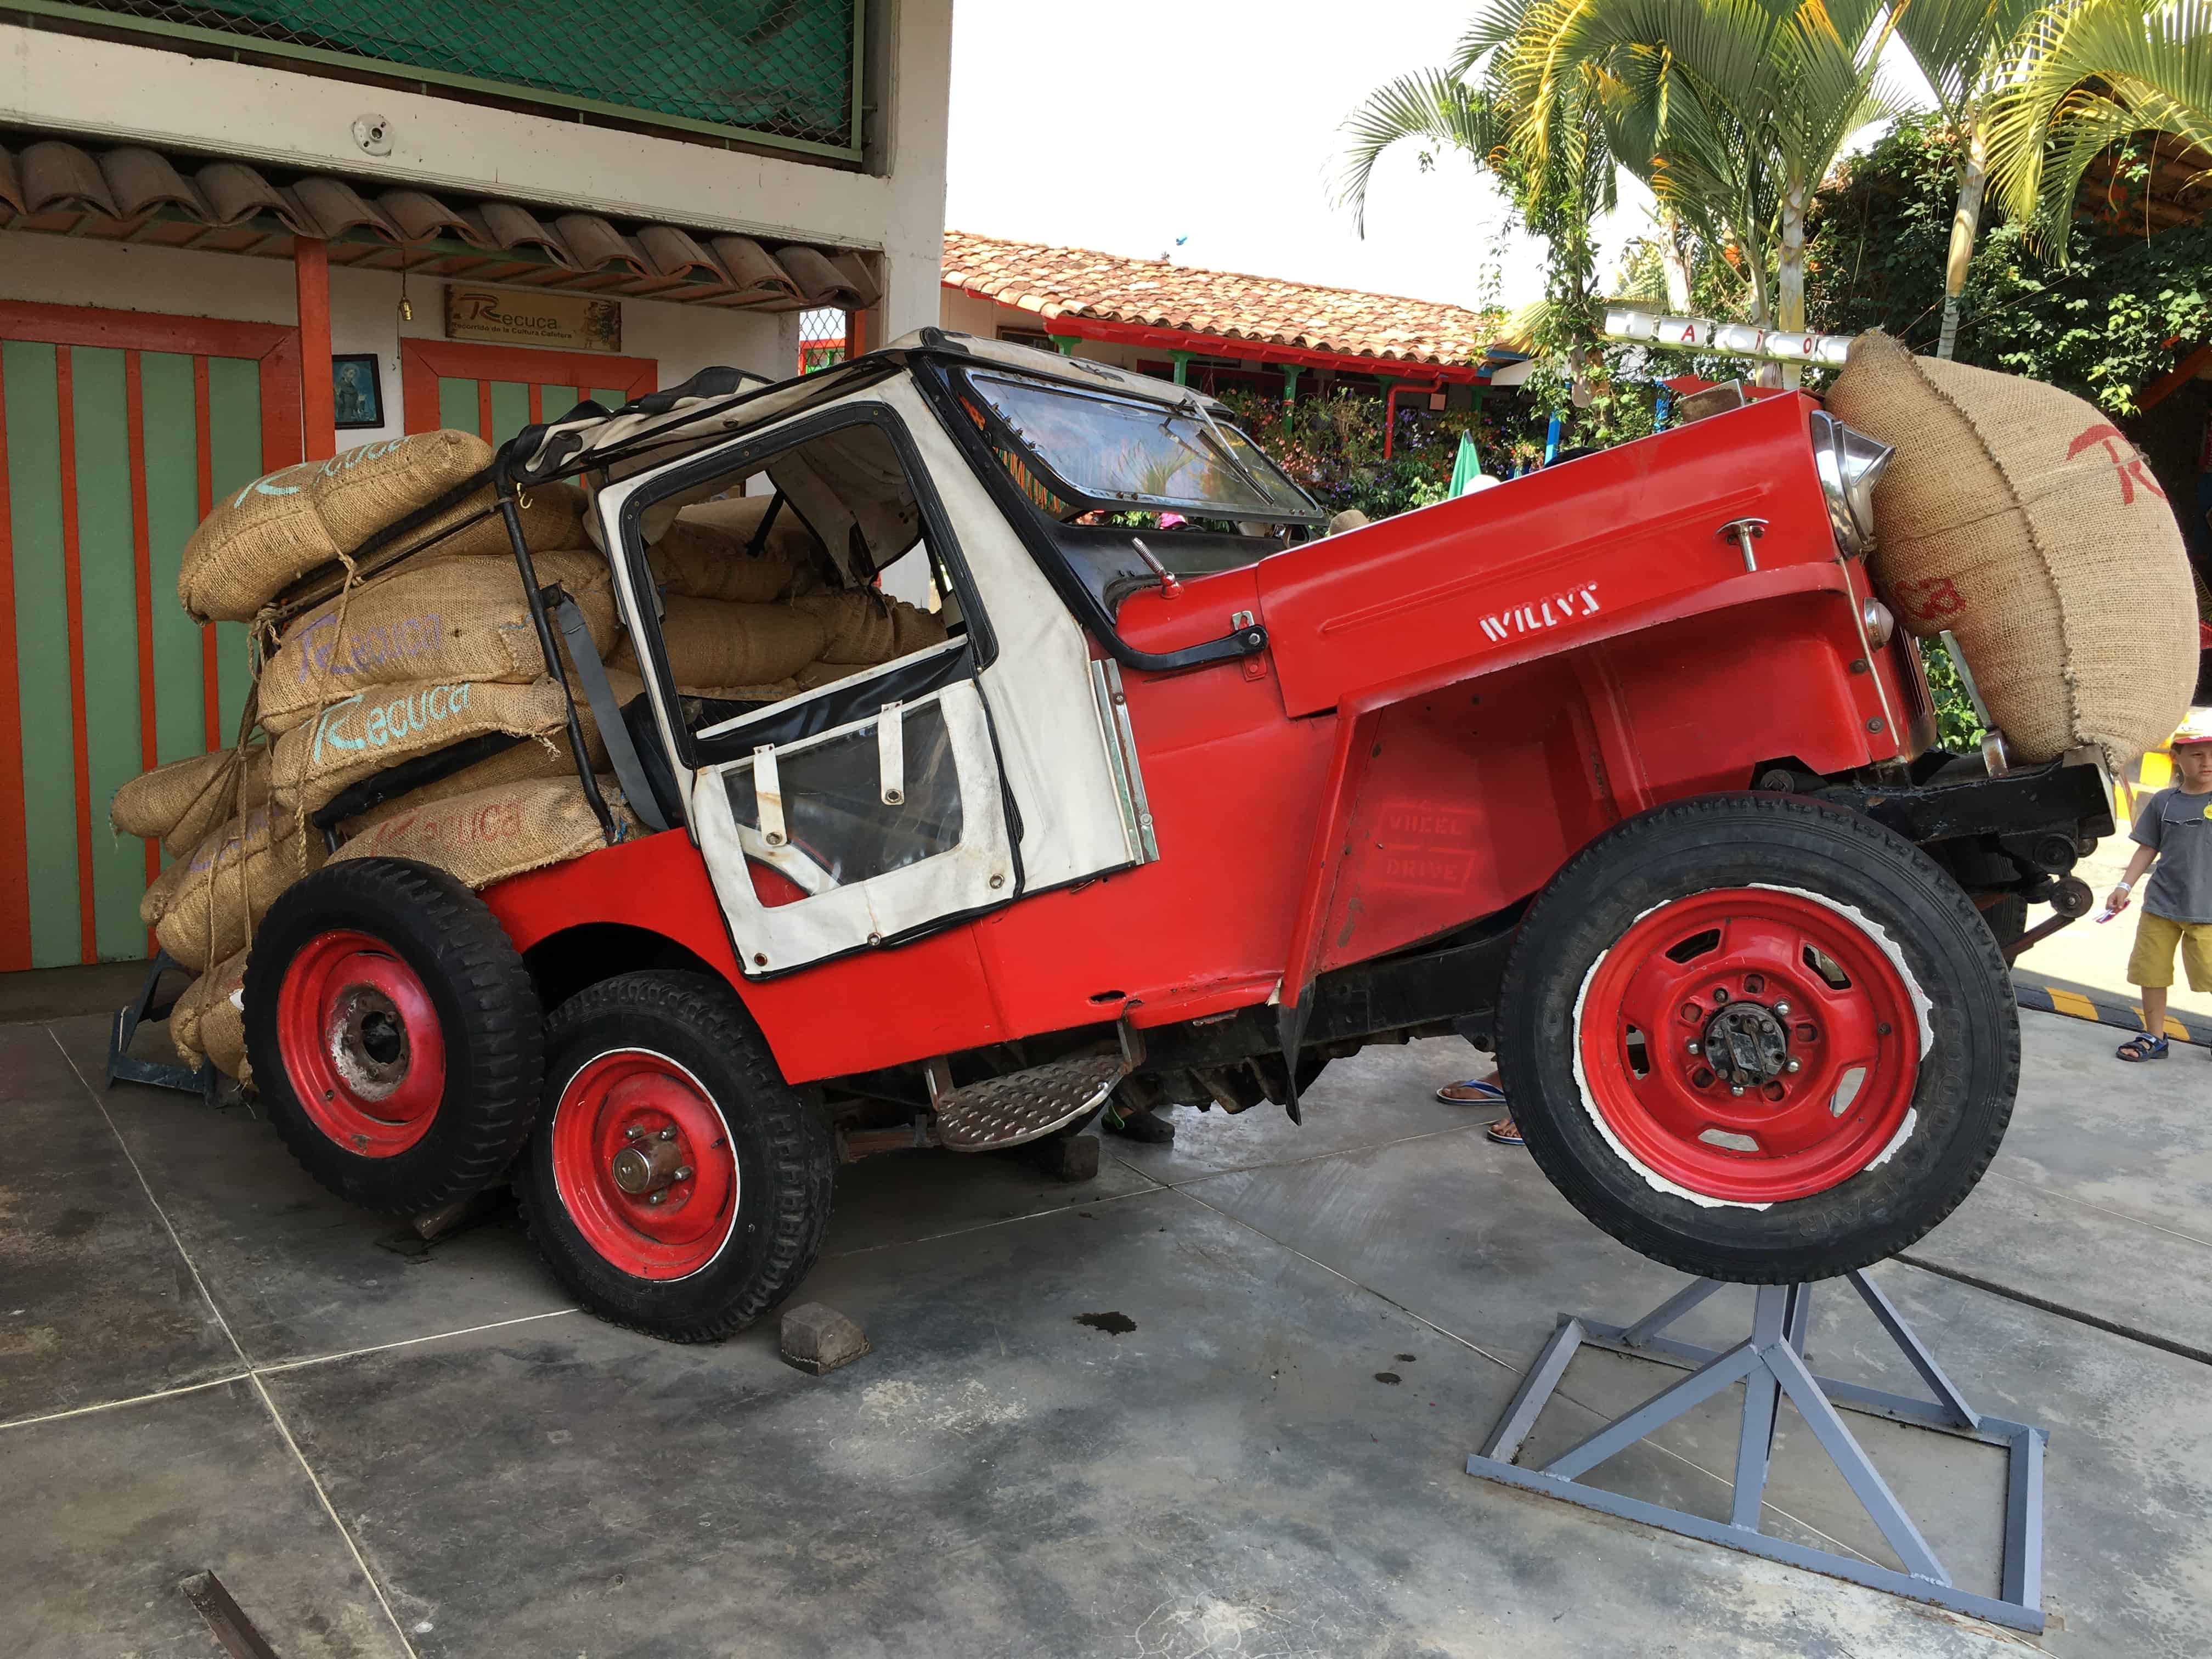 Jeep display at Recuca in Colombia